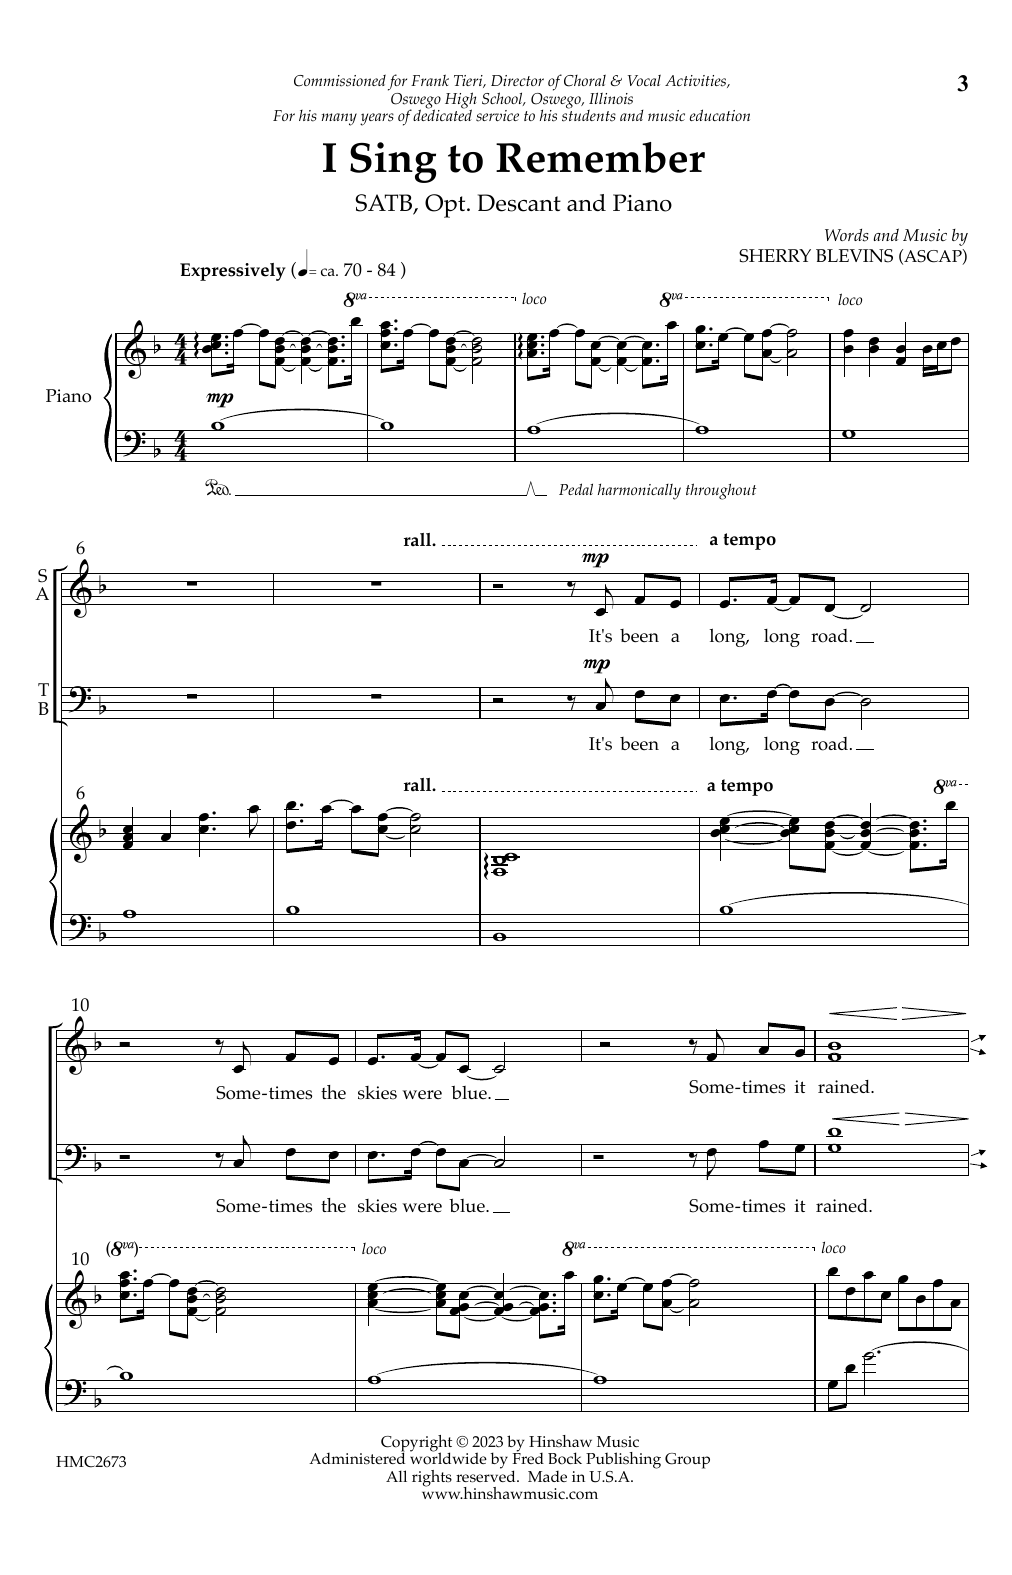 Download Sherry Blevins I Sing To Remember Sheet Music